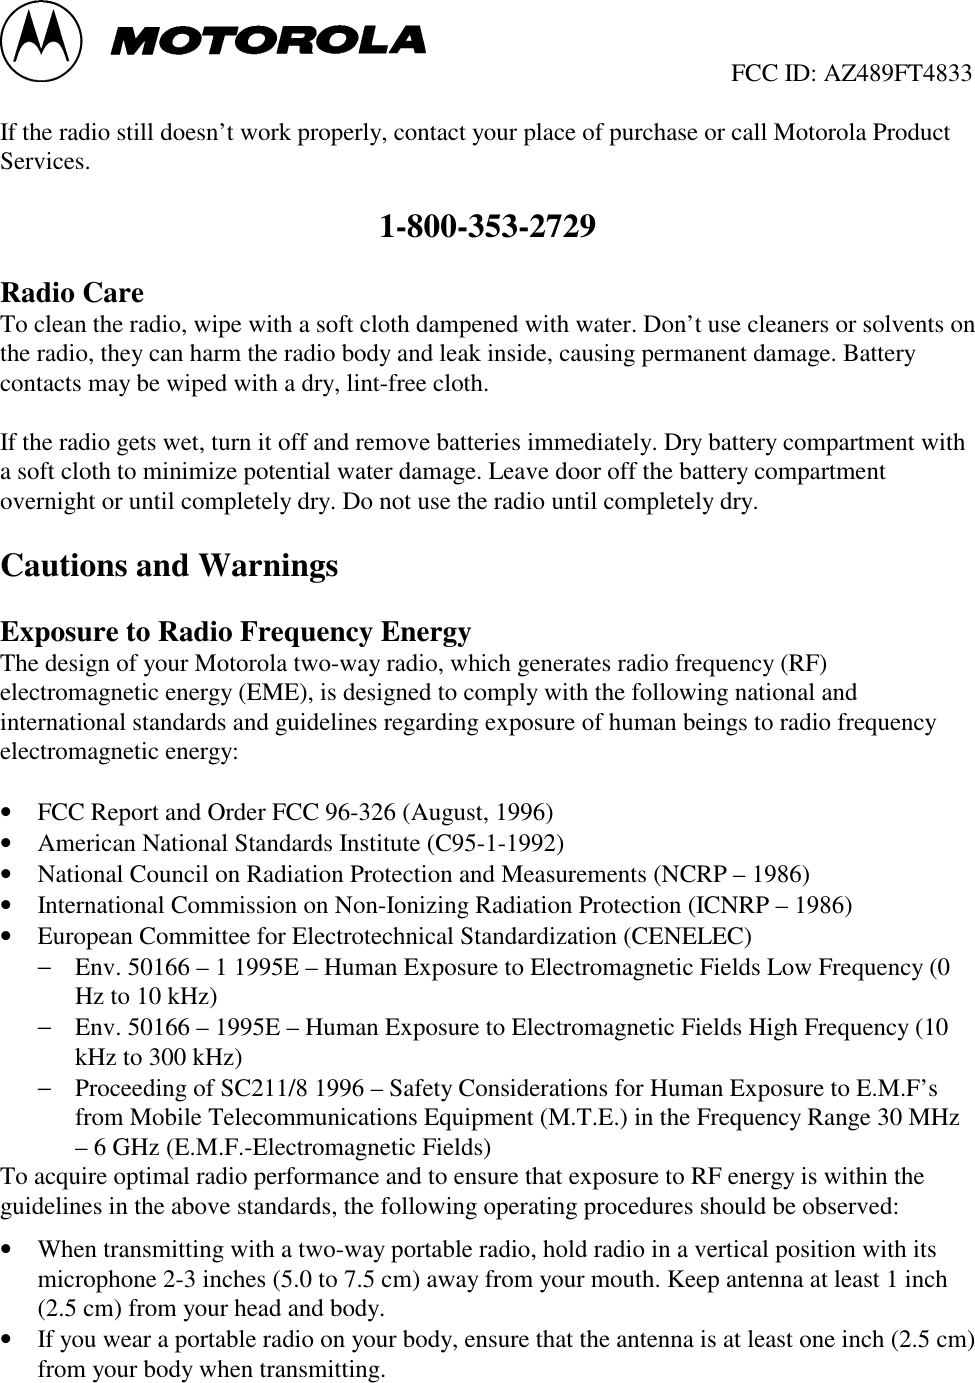                                                  FCC ID: AZ489FT4833If the radio still doesn’t work properly, contact your place of purchase or call Motorola ProductServices.1-800-353-2729Radio CareTo clean the radio, wipe with a soft cloth dampened with water. Don’t use cleaners or solvents onthe radio, they can harm the radio body and leak inside, causing permanent damage. Batterycontacts may be wiped with a dry, lint-free cloth.If the radio gets wet, turn it off and remove batteries immediately. Dry battery compartment witha soft cloth to minimize potential water damage. Leave door off the battery compartmentovernight or until completely dry. Do not use the radio until completely dry.Cautions and WarningsExposure to Radio Frequency EnergyThe design of your Motorola two-way radio, which generates radio frequency (RF)electromagnetic energy (EME), is designed to comply with the following national andinternational standards and guidelines regarding exposure of human beings to radio frequencyelectromagnetic energy:• FCC Report and Order FCC 96-326 (August, 1996)• American National Standards Institute (C95-1-1992)• National Council on Radiation Protection and Measurements (NCRP – 1986)• International Commission on Non-Ionizing Radiation Protection (ICNRP – 1986)• European Committee for Electrotechnical Standardization (CENELEC)− Env. 50166 – 1 1995E – Human Exposure to Electromagnetic Fields Low Frequency (0Hz to 10 kHz)− Env. 50166 – 1995E – Human Exposure to Electromagnetic Fields High Frequency (10kHz to 300 kHz)− Proceeding of SC211/8 1996 – Safety Considerations for Human Exposure to E.M.F’sfrom Mobile Telecommunications Equipment (M.T.E.) in the Frequency Range 30 MHz– 6 GHz (E.M.F.-Electromagnetic Fields)To acquire optimal radio performance and to ensure that exposure to RF energy is within theguidelines in the above standards, the following operating procedures should be observed:• When transmitting with a two-way portable radio, hold radio in a vertical position with itsmicrophone 2-3 inches (5.0 to 7.5 cm) away from your mouth. Keep antenna at least 1 inch(2.5 cm) from your head and body.• If you wear a portable radio on your body, ensure that the antenna is at least one inch (2.5 cm)from your body when transmitting.